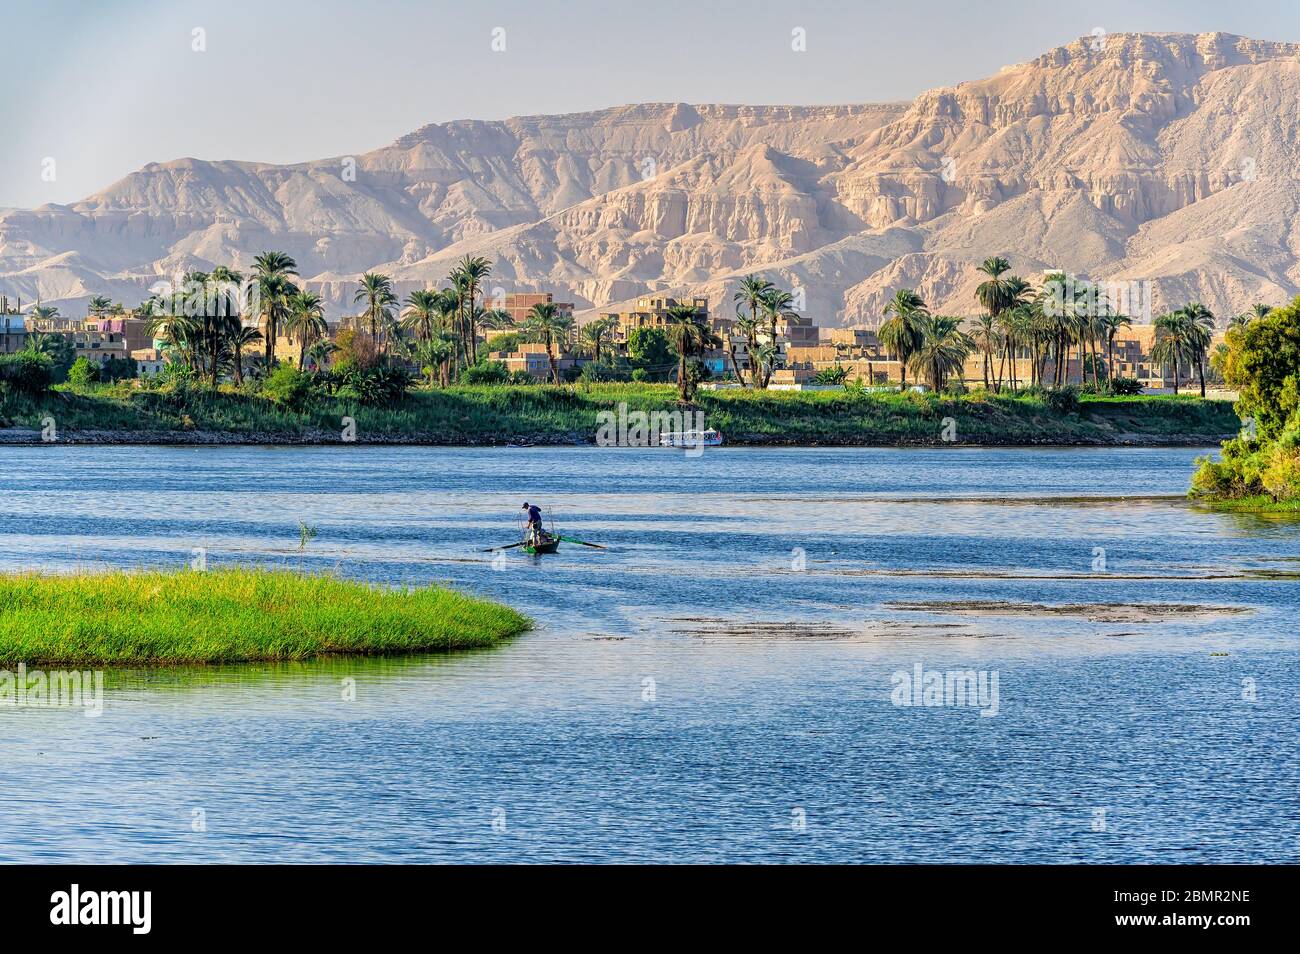 Fisherman on the Nile river hauls in his catch  with the mountains of the Nile West Bank in the background Stock Photo